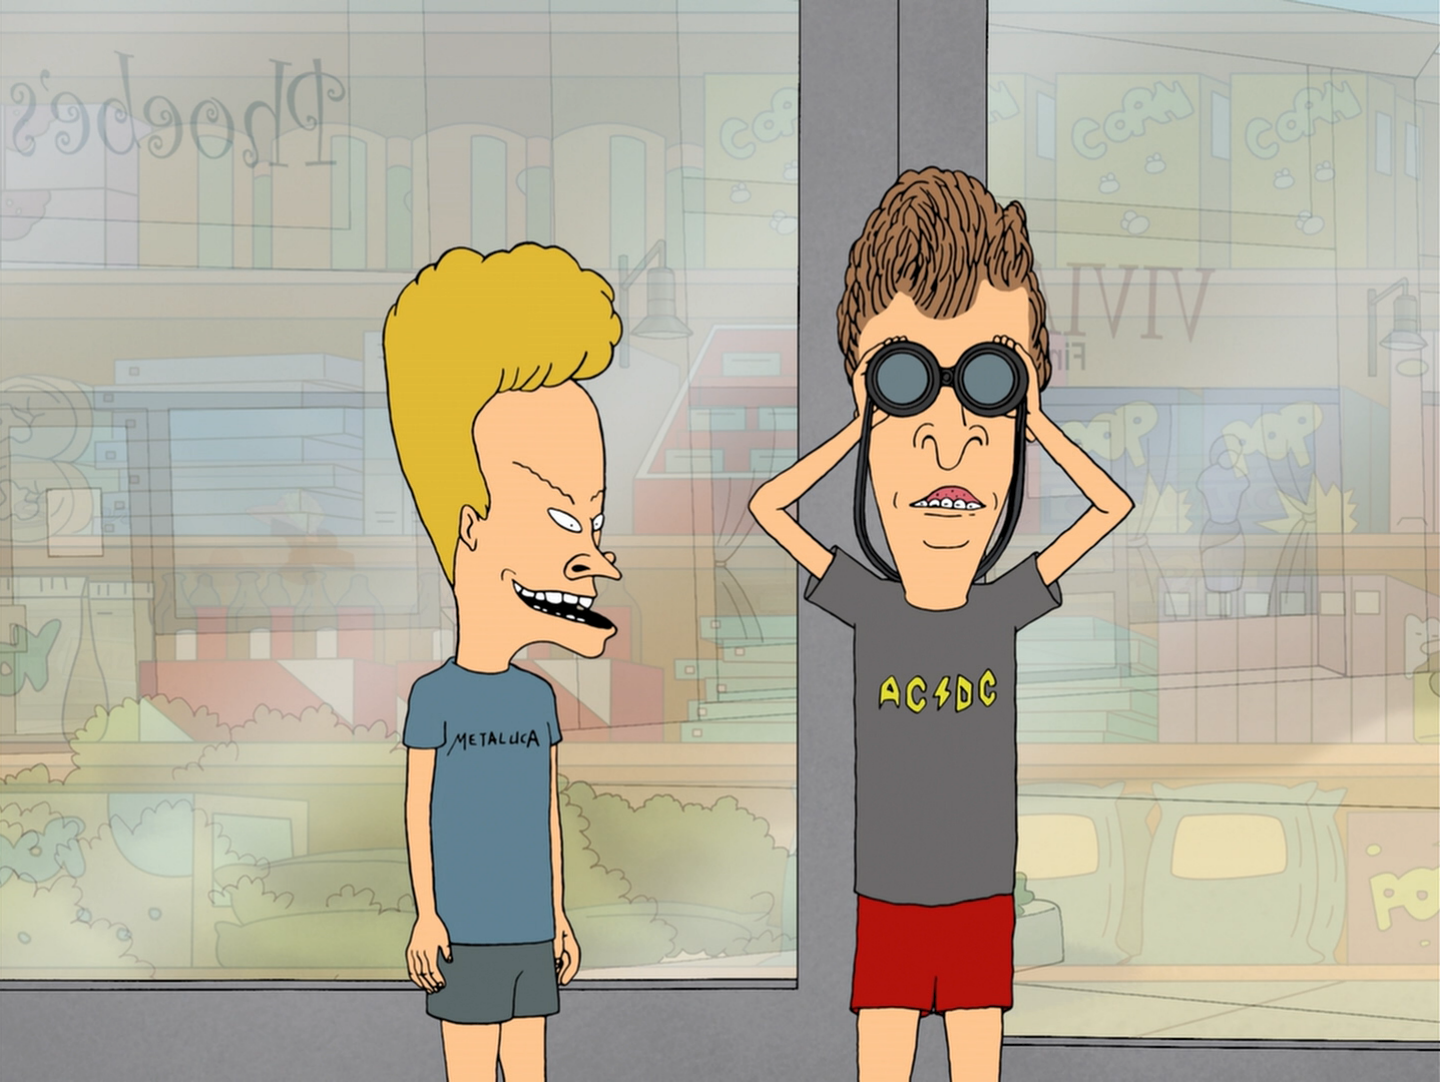 download bevis and buthead